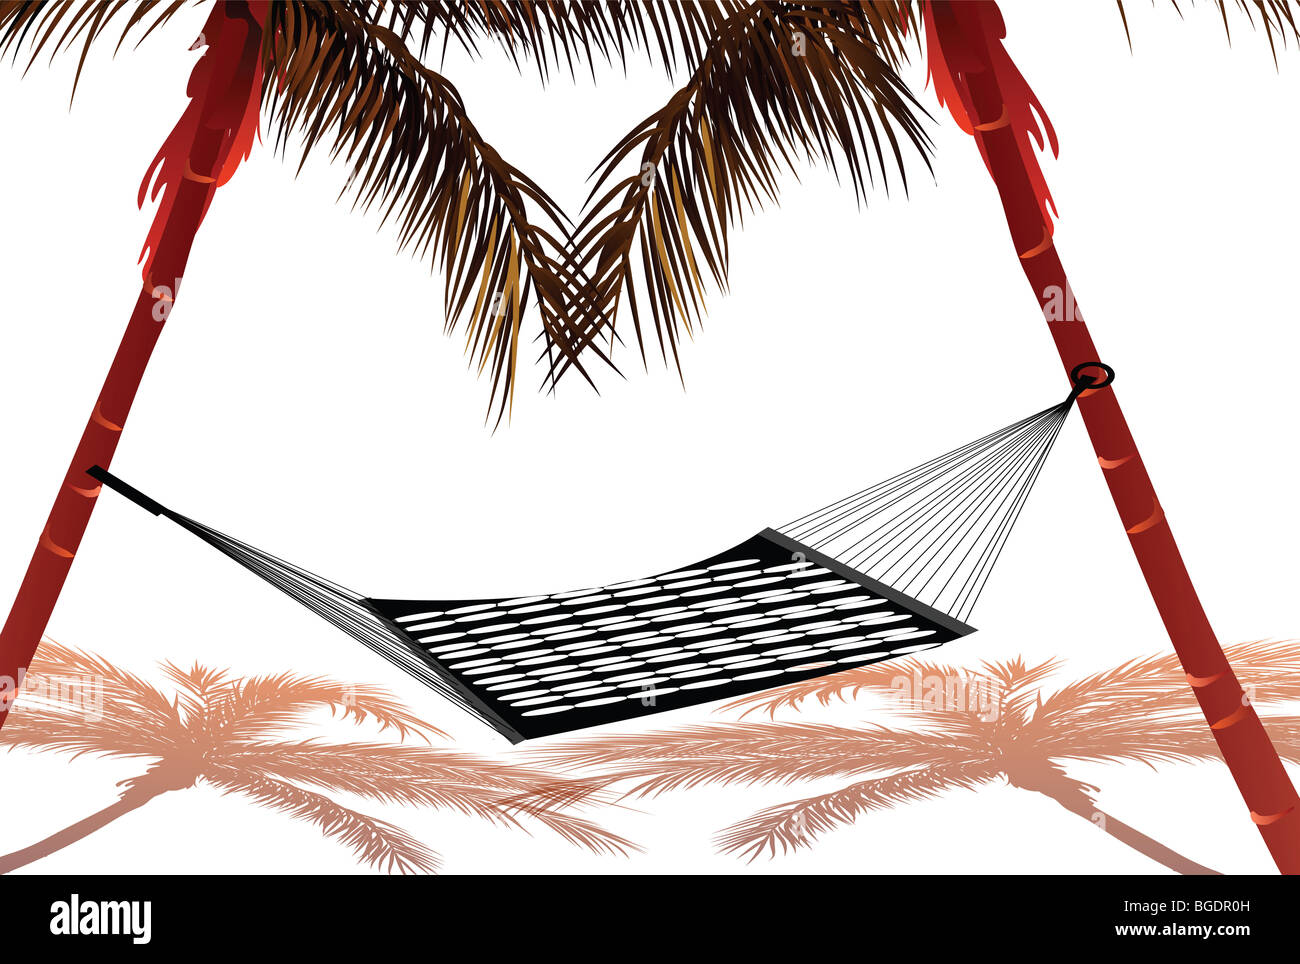 hammock tied to two coconut trees, white background Stock Photo